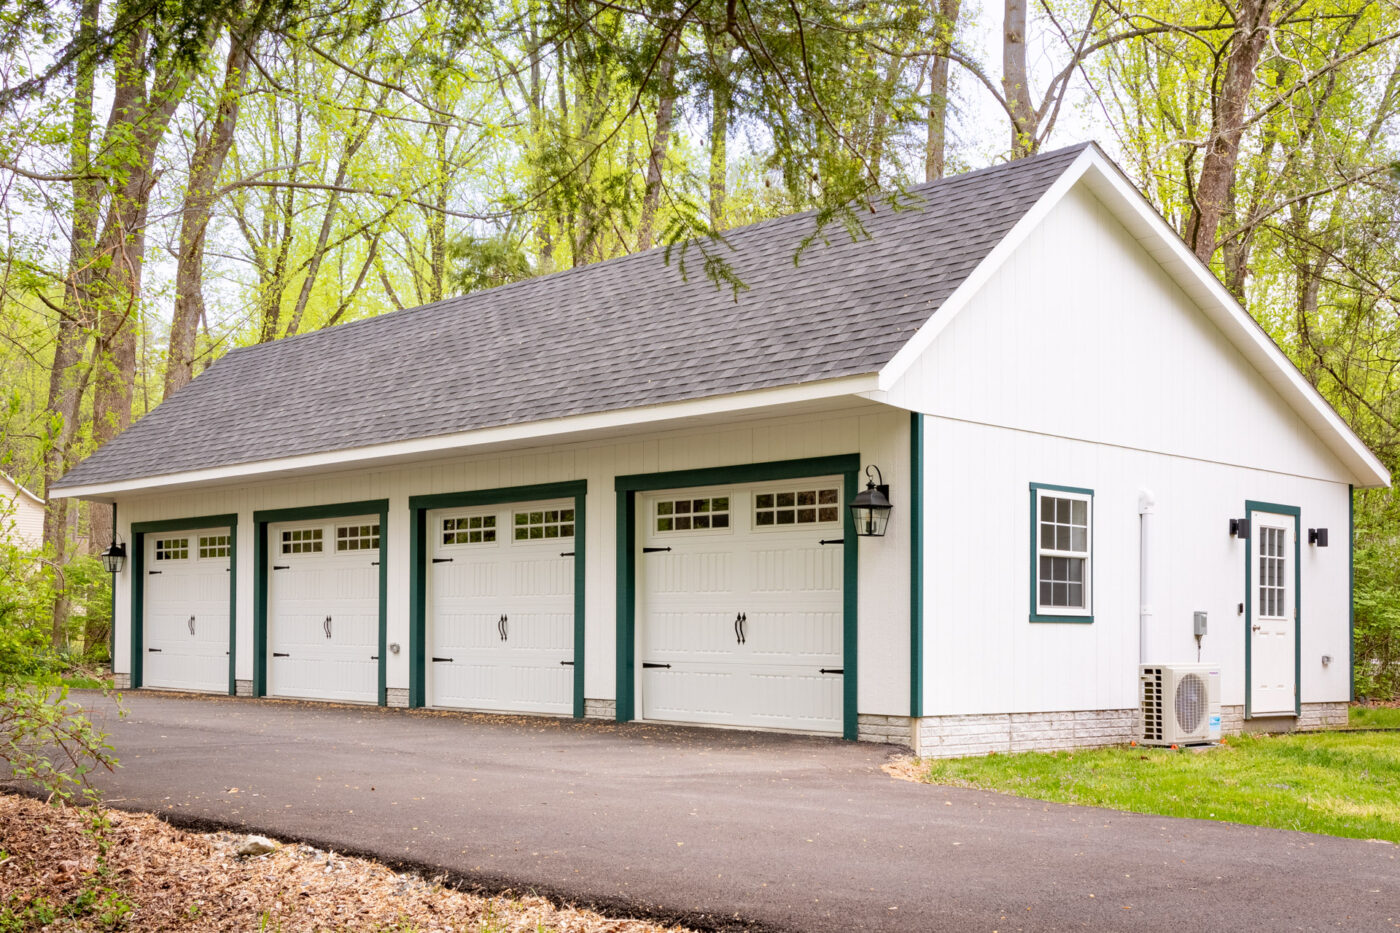 A four-car garage for sale in MA.